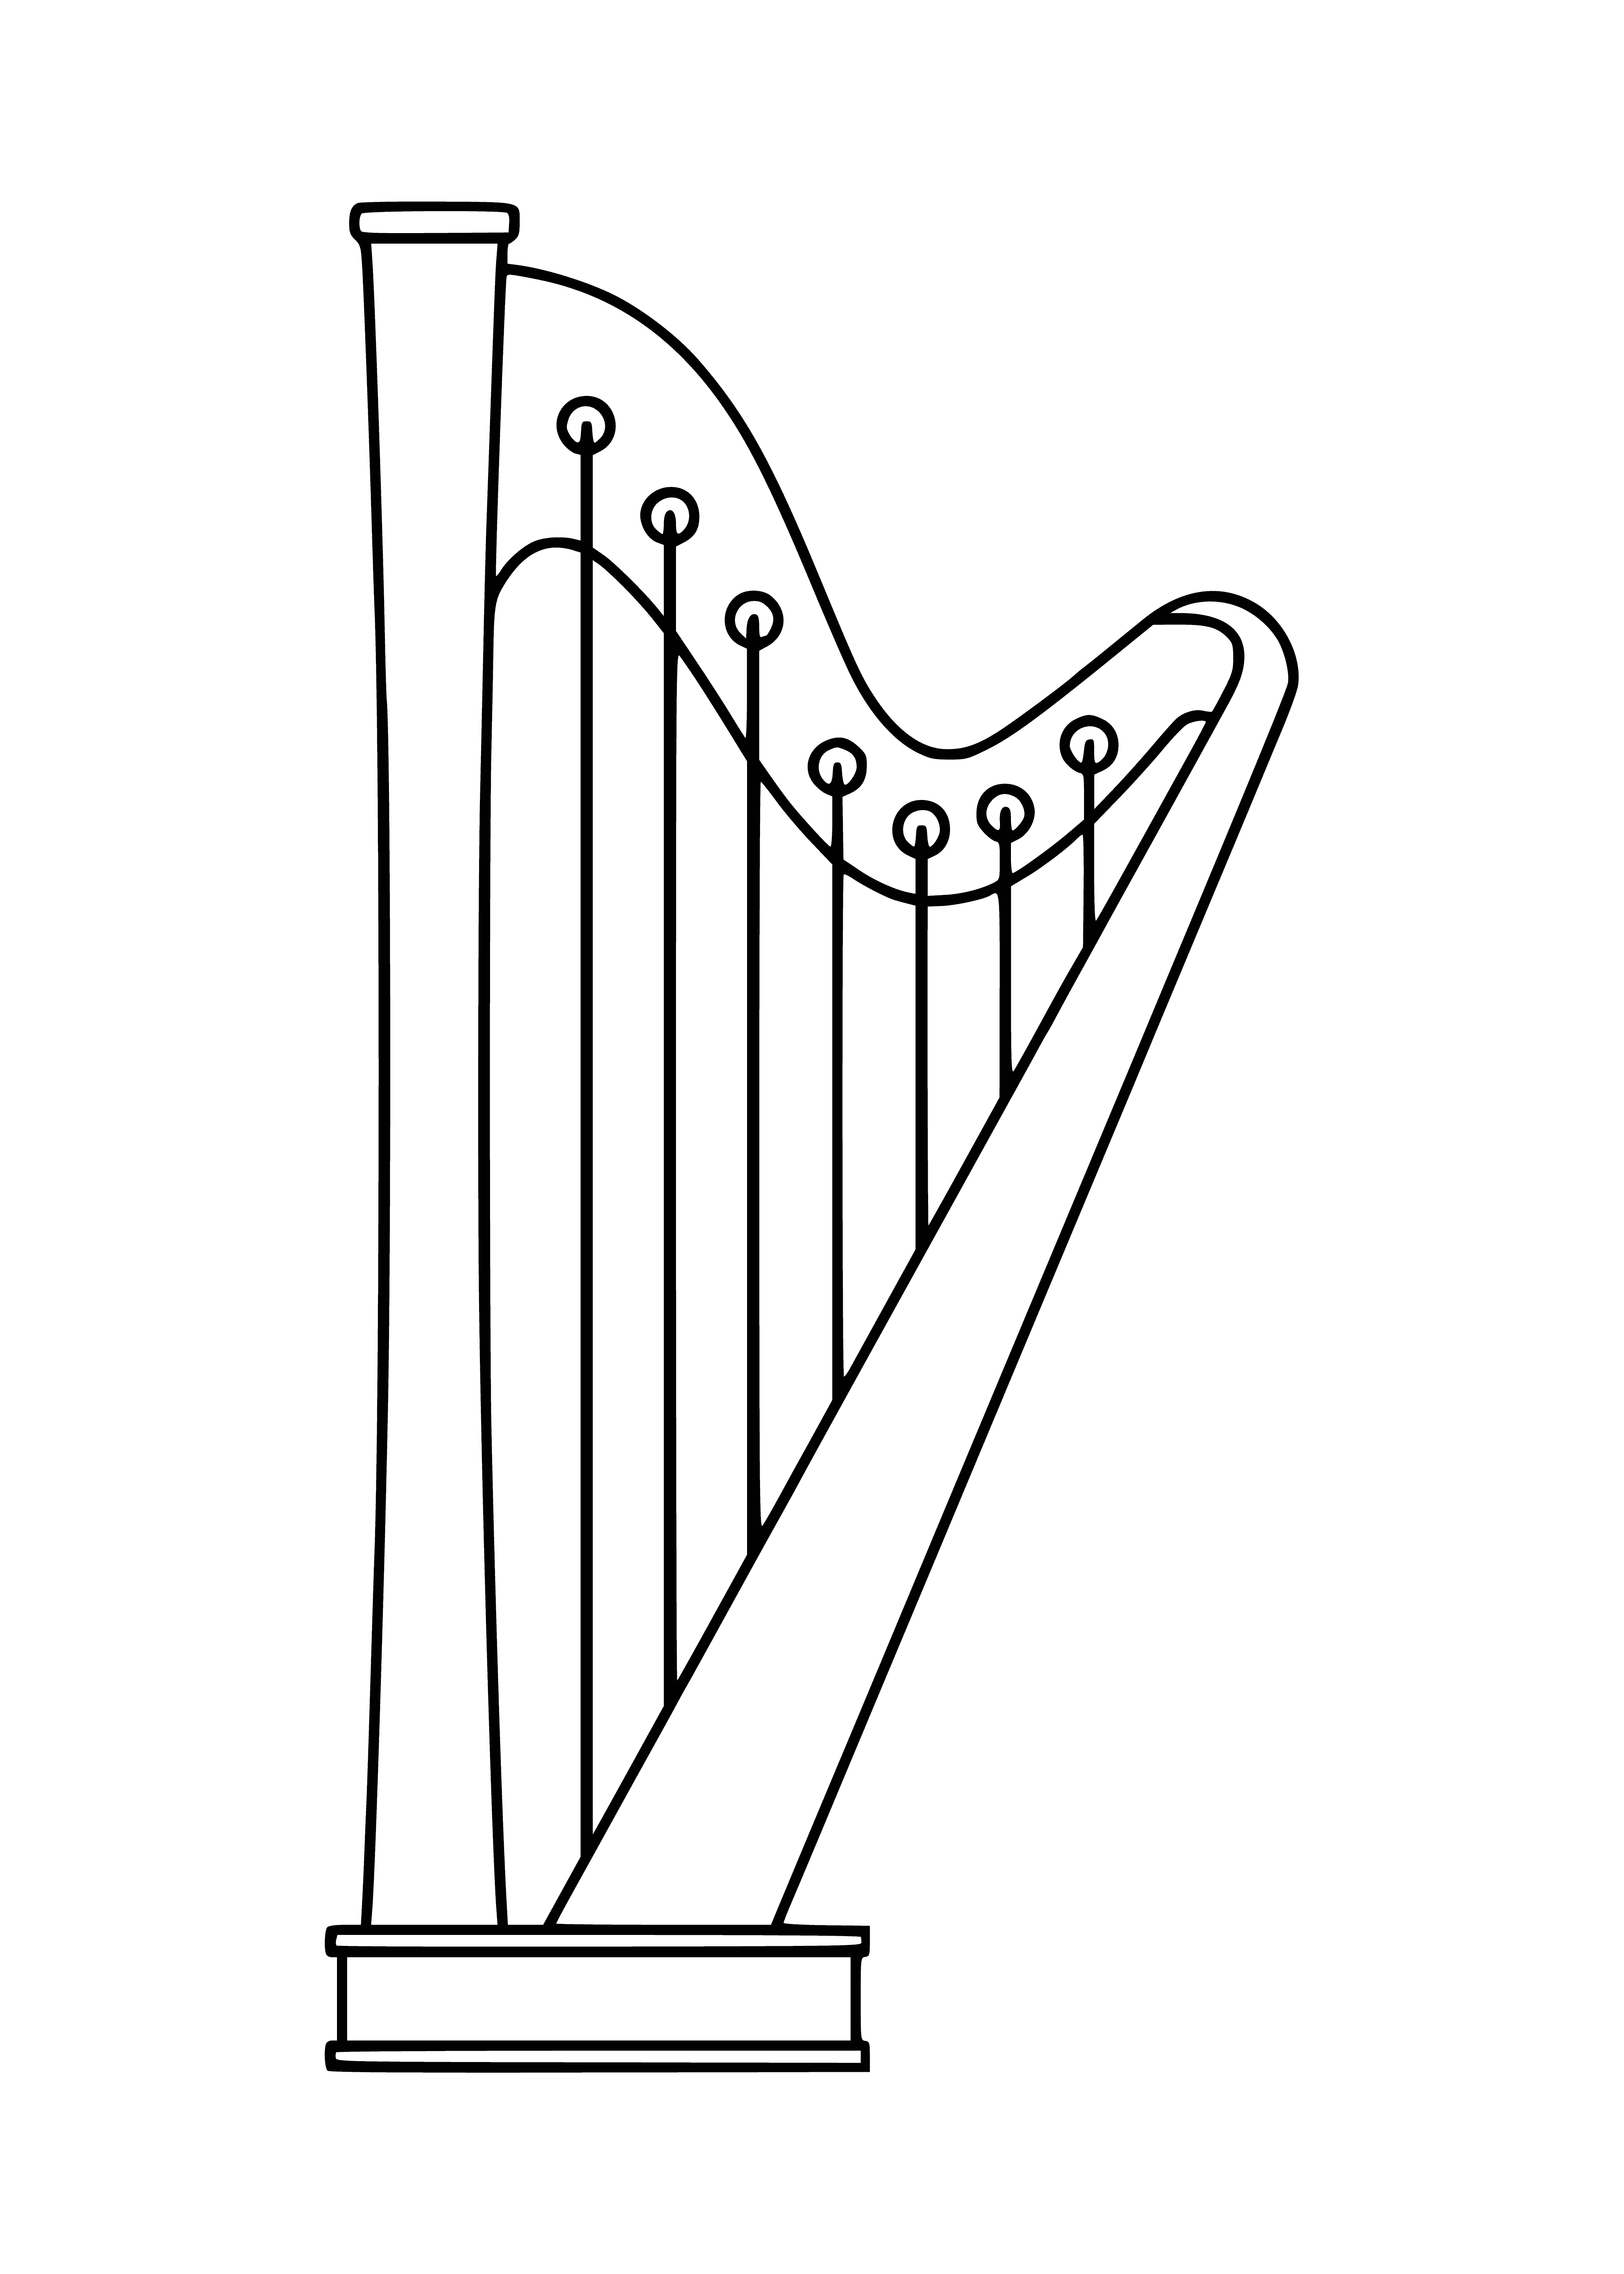 coloring page: Stringed instrument with triangular frame & soundboard. Player plucks strings to produce sound.